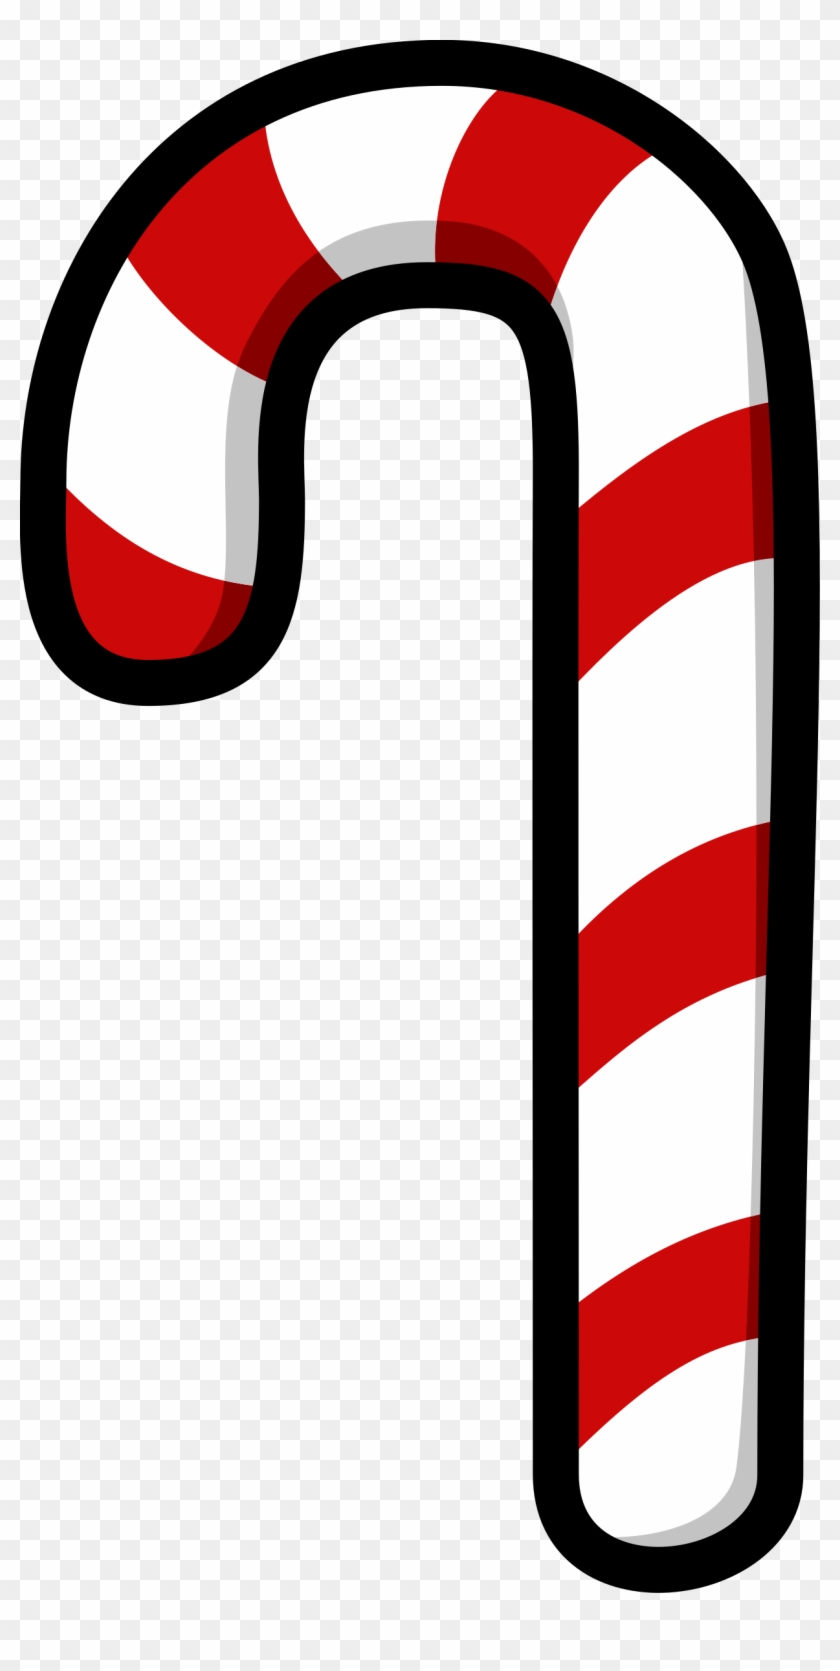 Number Clipart Candy Cane - Candy Cane #110534